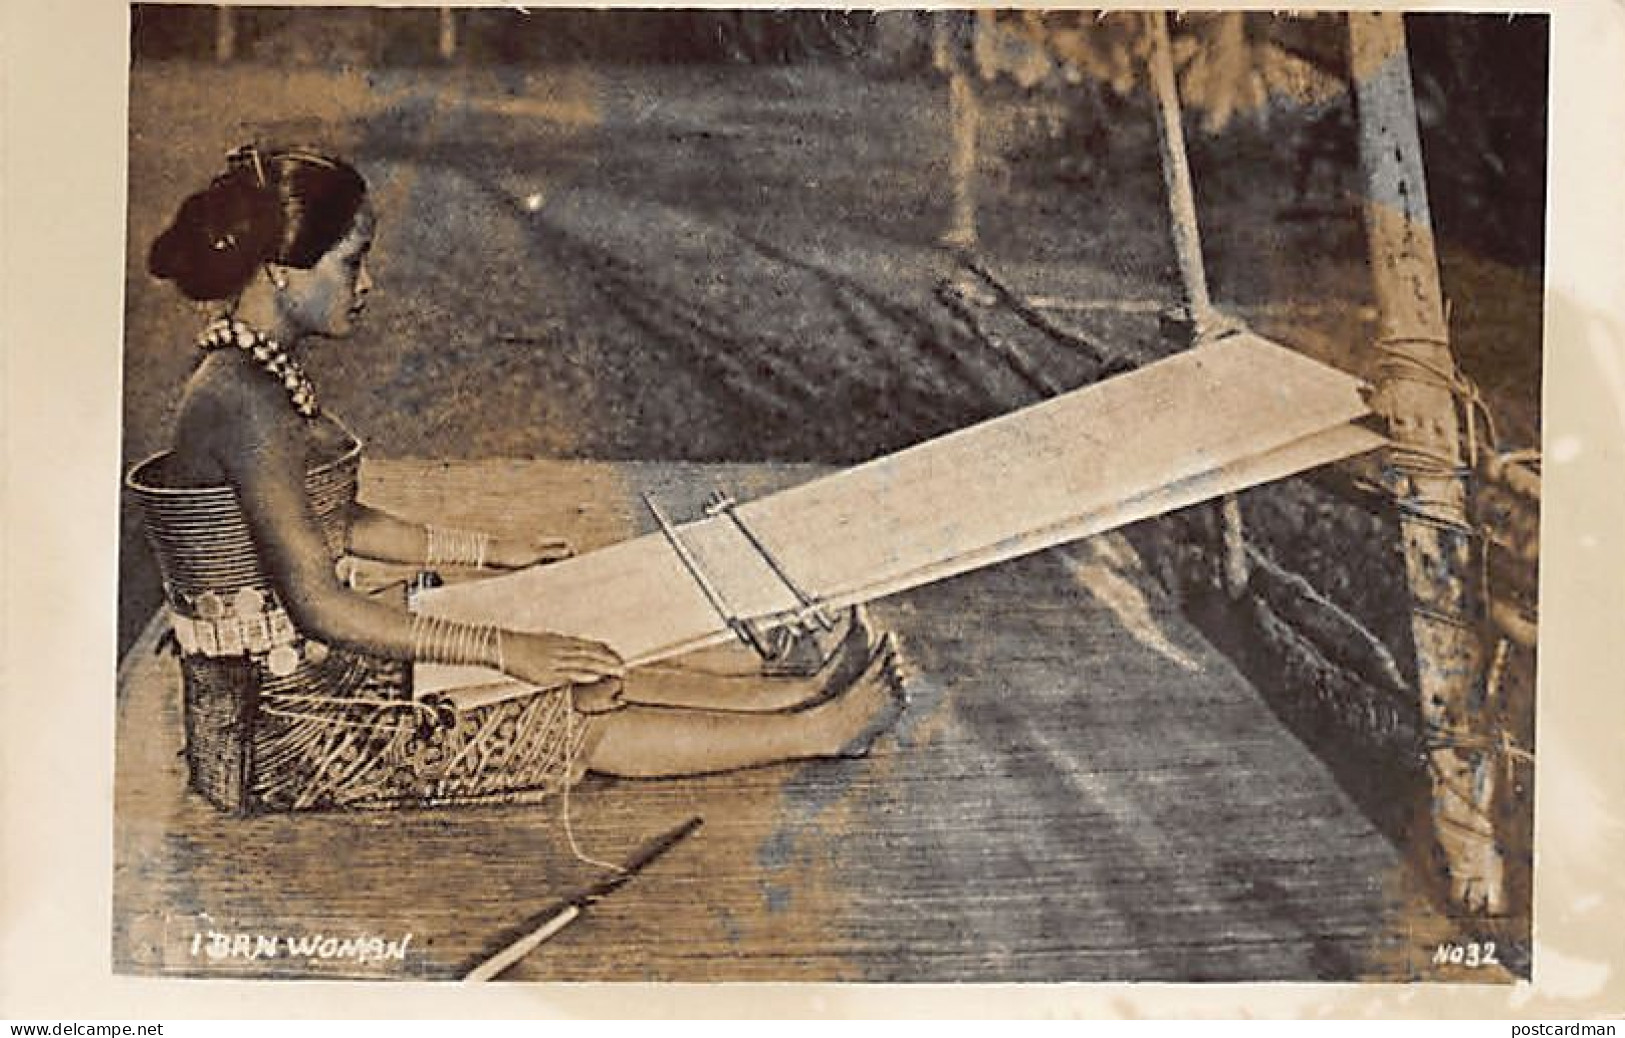 Malaysia - Iban Woman Weaving - REAL PHOTO - Publ. Unknown 32 - Malesia